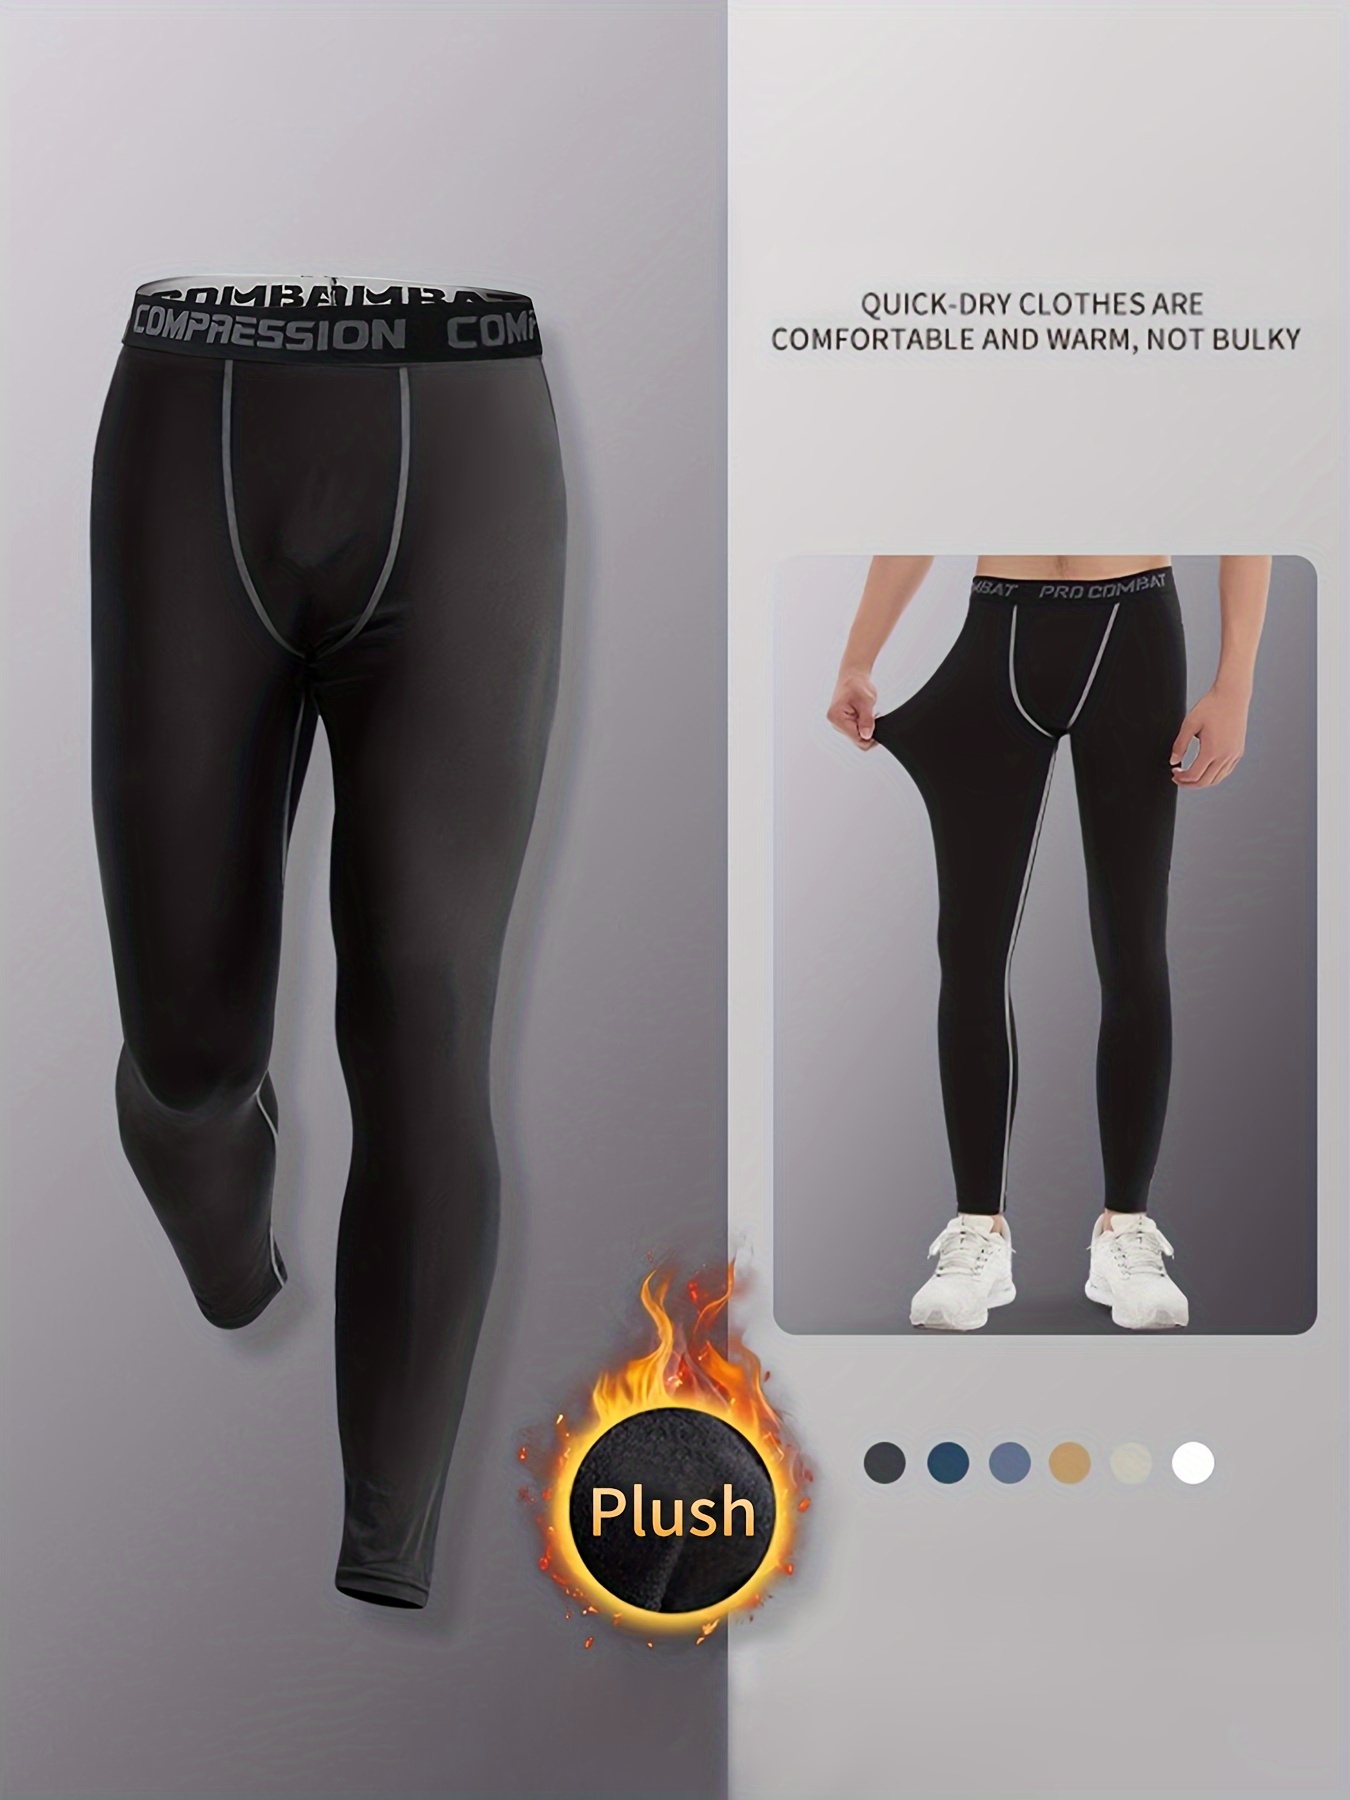 Pro Combat Basketball Pants For Men Quickly Dry, Quick Drying